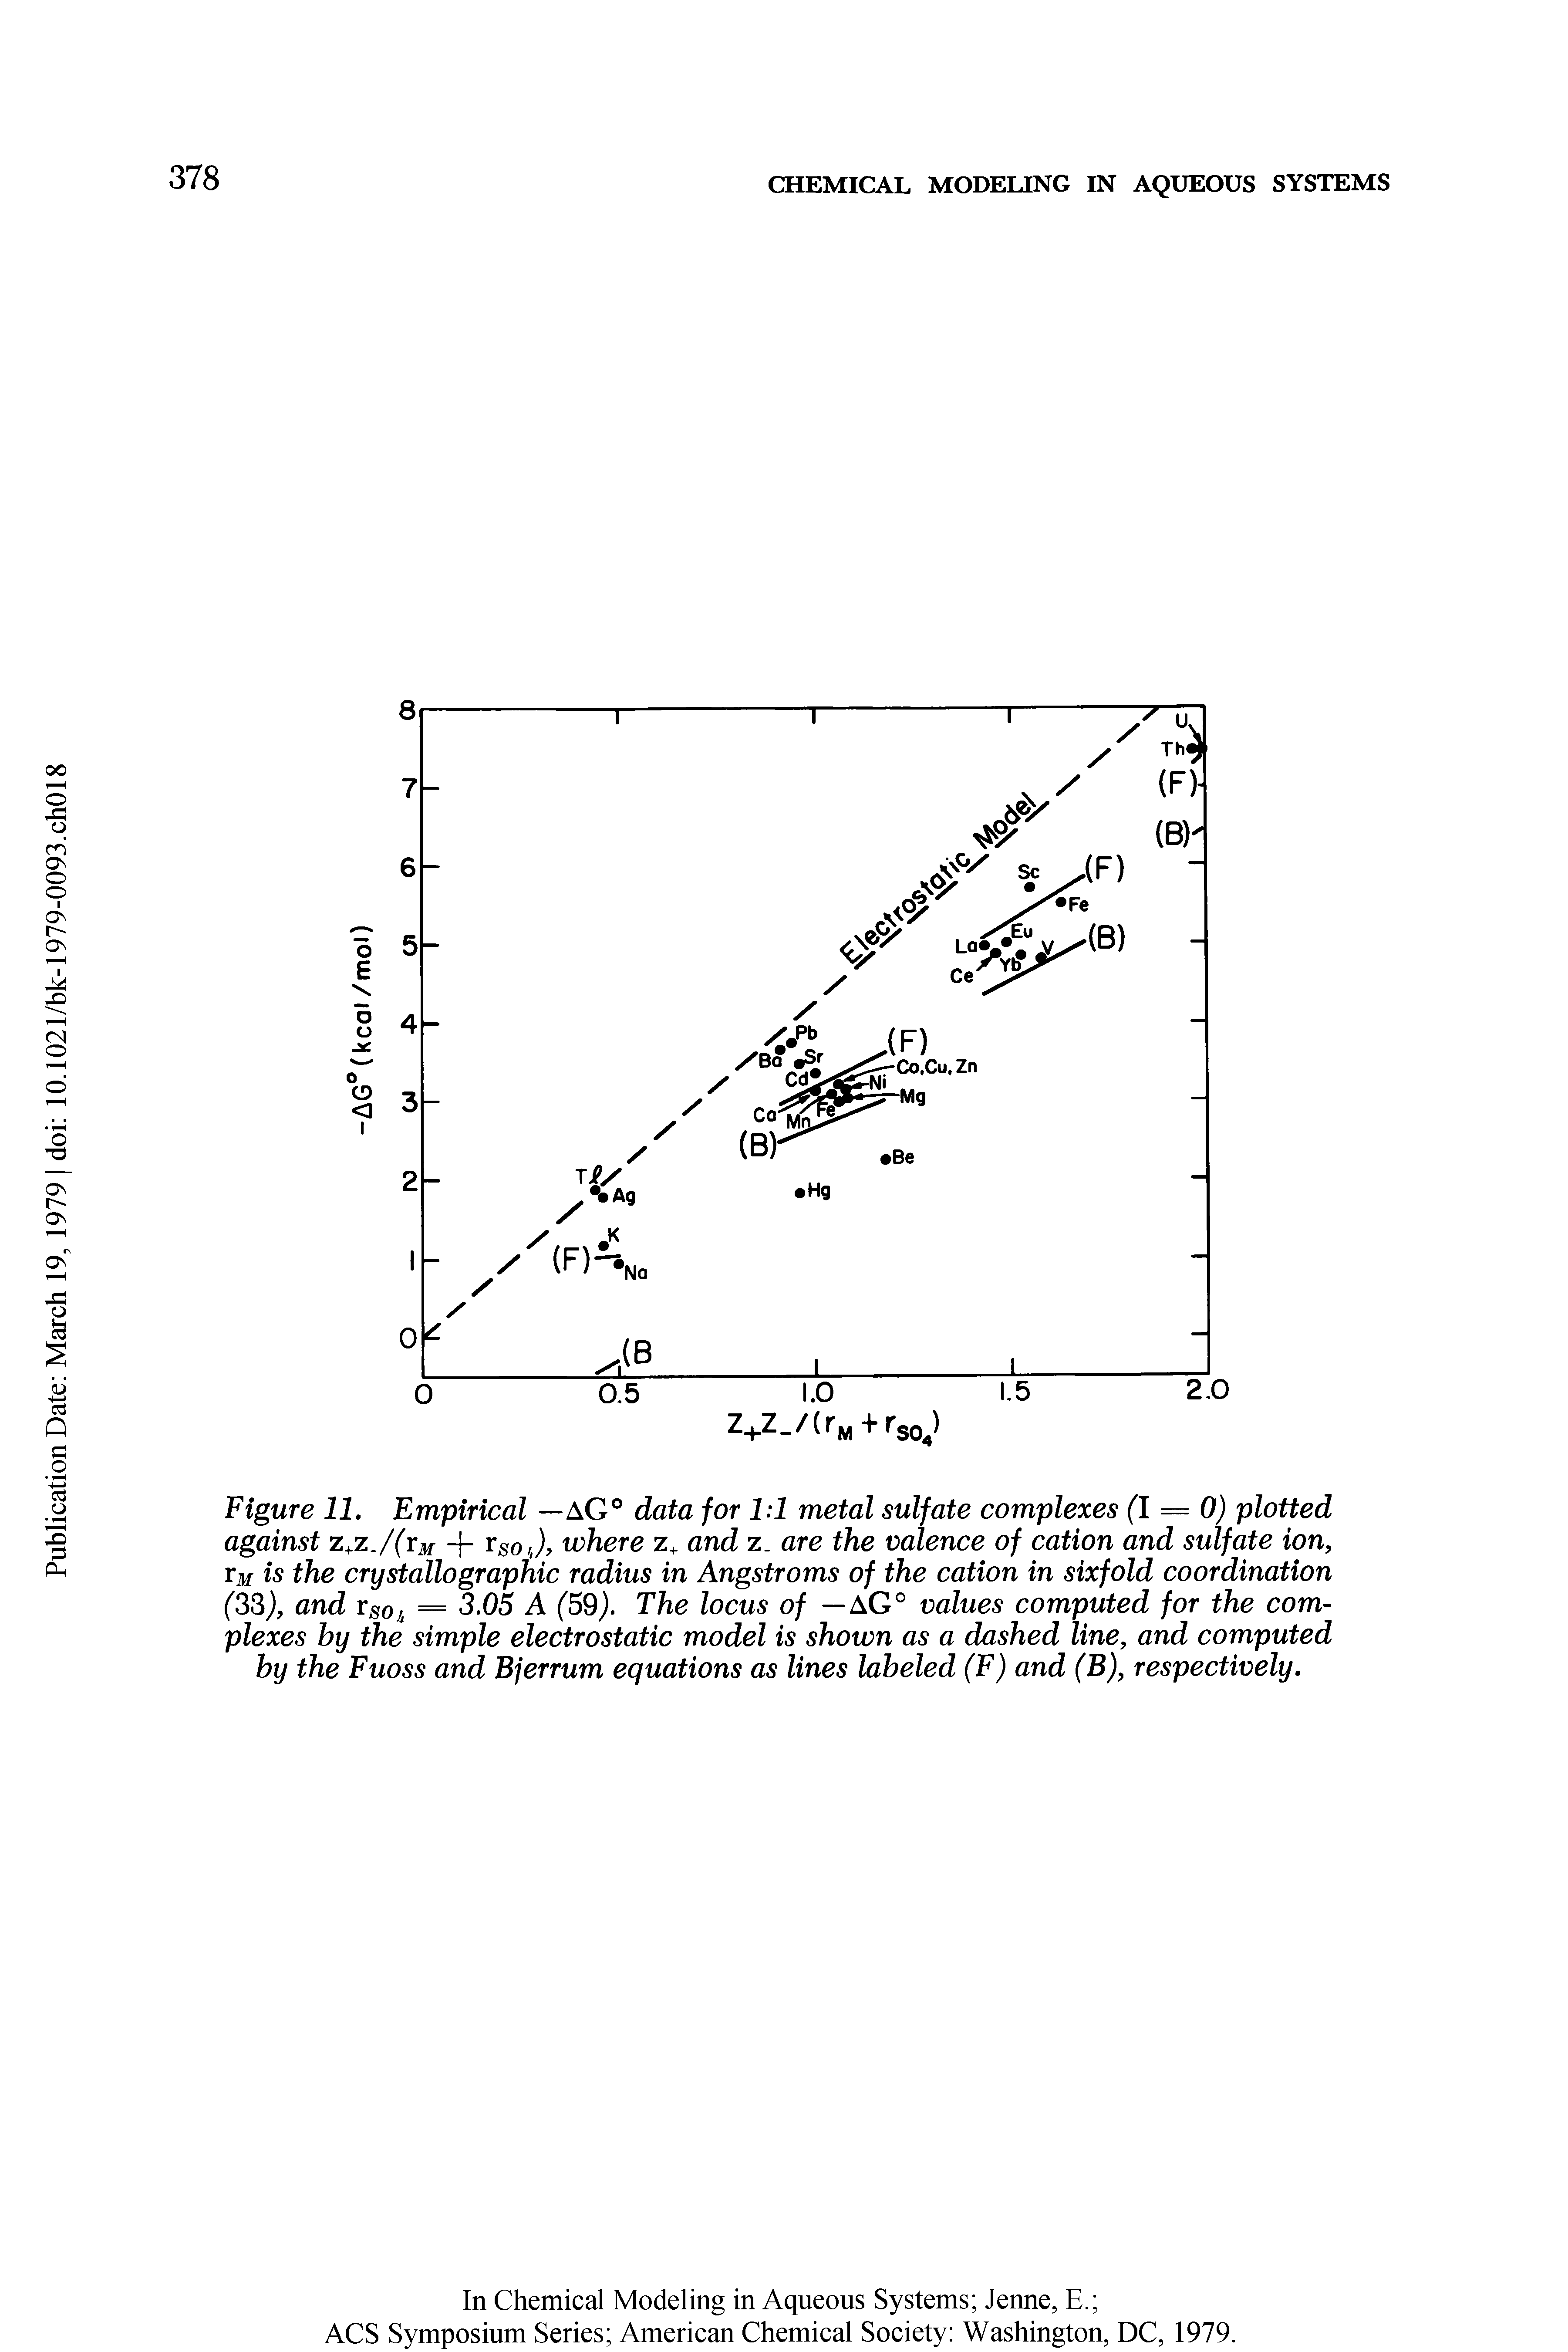 Figure 11. Empirical — aG° data for 1 1 metal sulfate complexes (1 = 0) plotted against z z./(ym + r o J, where z+ and z. are the valence of cation and sulfate ion, Ym is the crystallographic radius in Angstroms of the cation in sixfold coordination (3S), and ysoj, = 3.05 A (59). The locus of — aG° values computed for the complexes by the simple electrostatic model is shown as a dashed line, and computed by the Fuoss and Bjerrum equations as lines labeled (F) and (B), respectively.